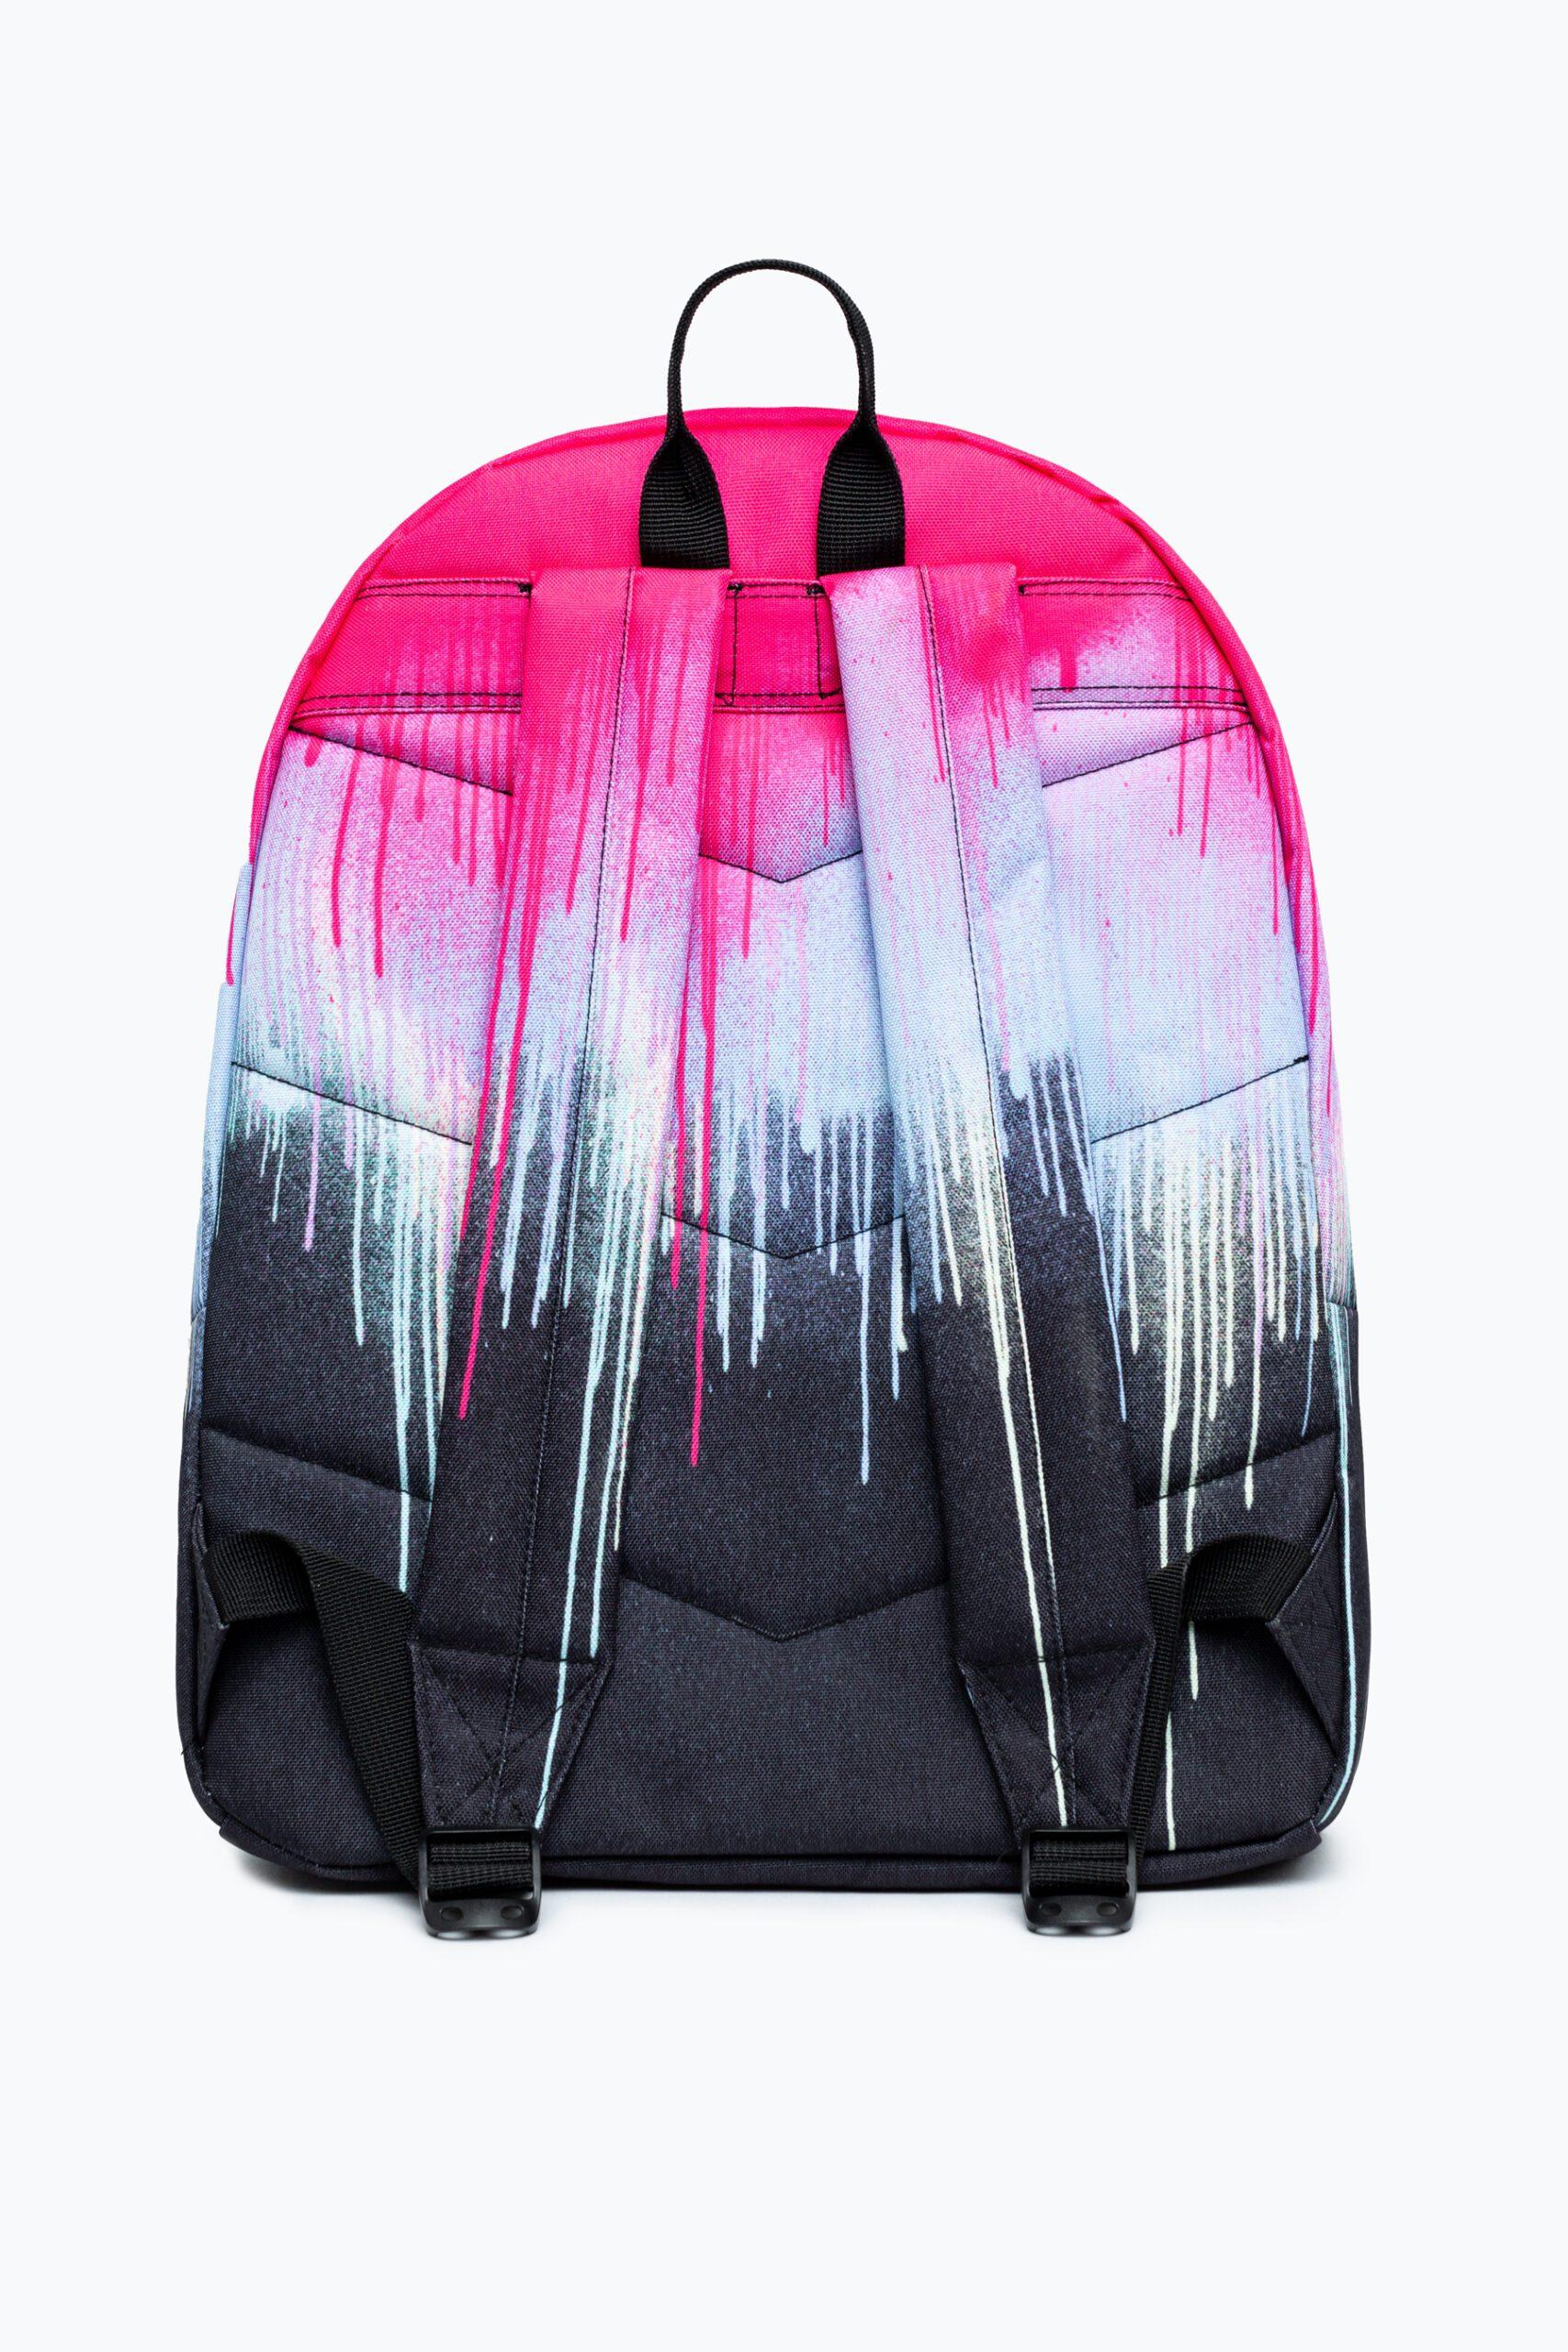 Hype pink and black paint drip backpack back view